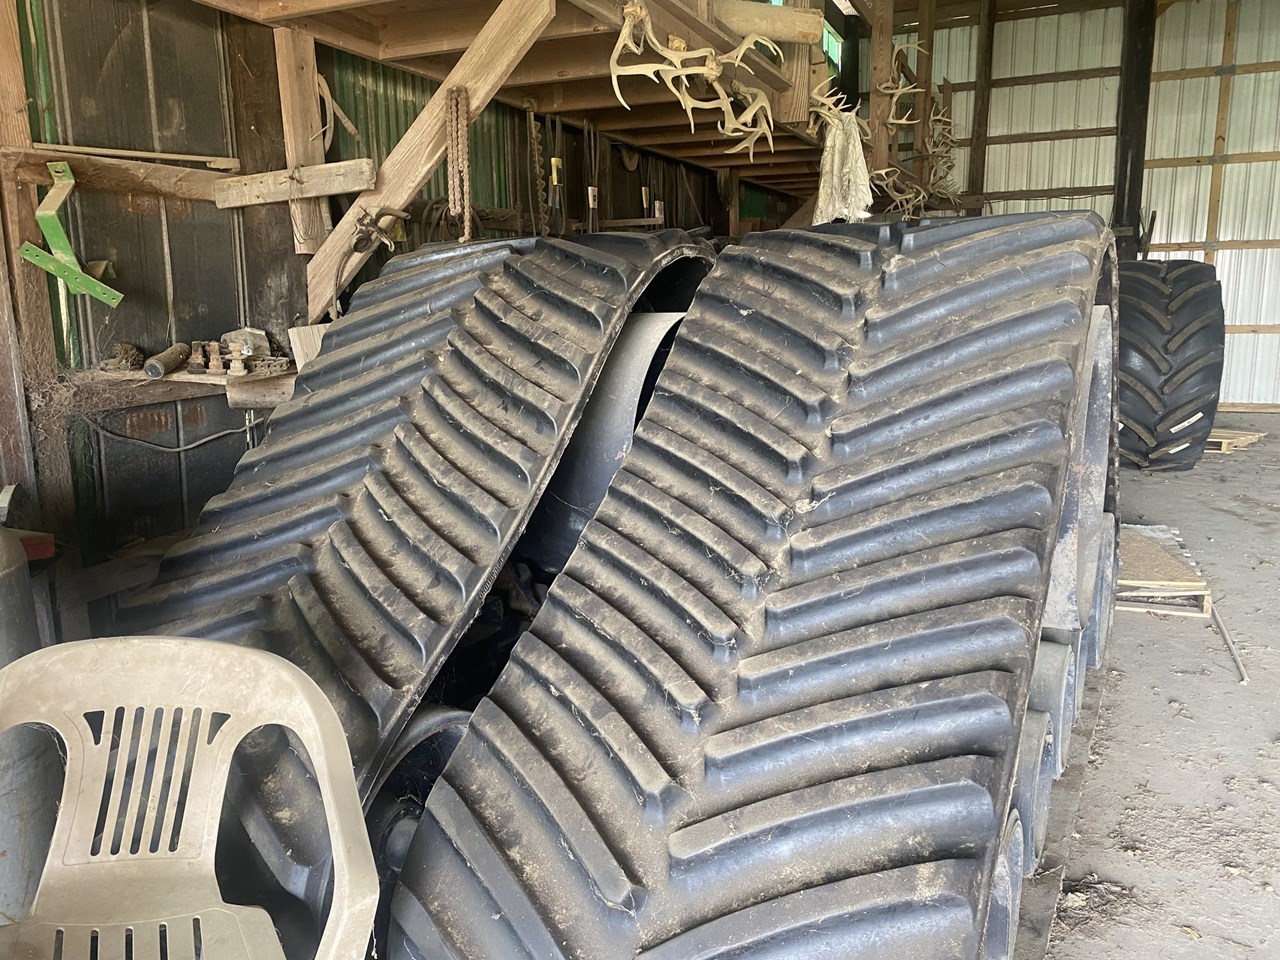 2021 GripTrac hd423 Tires and Tracks For Sale